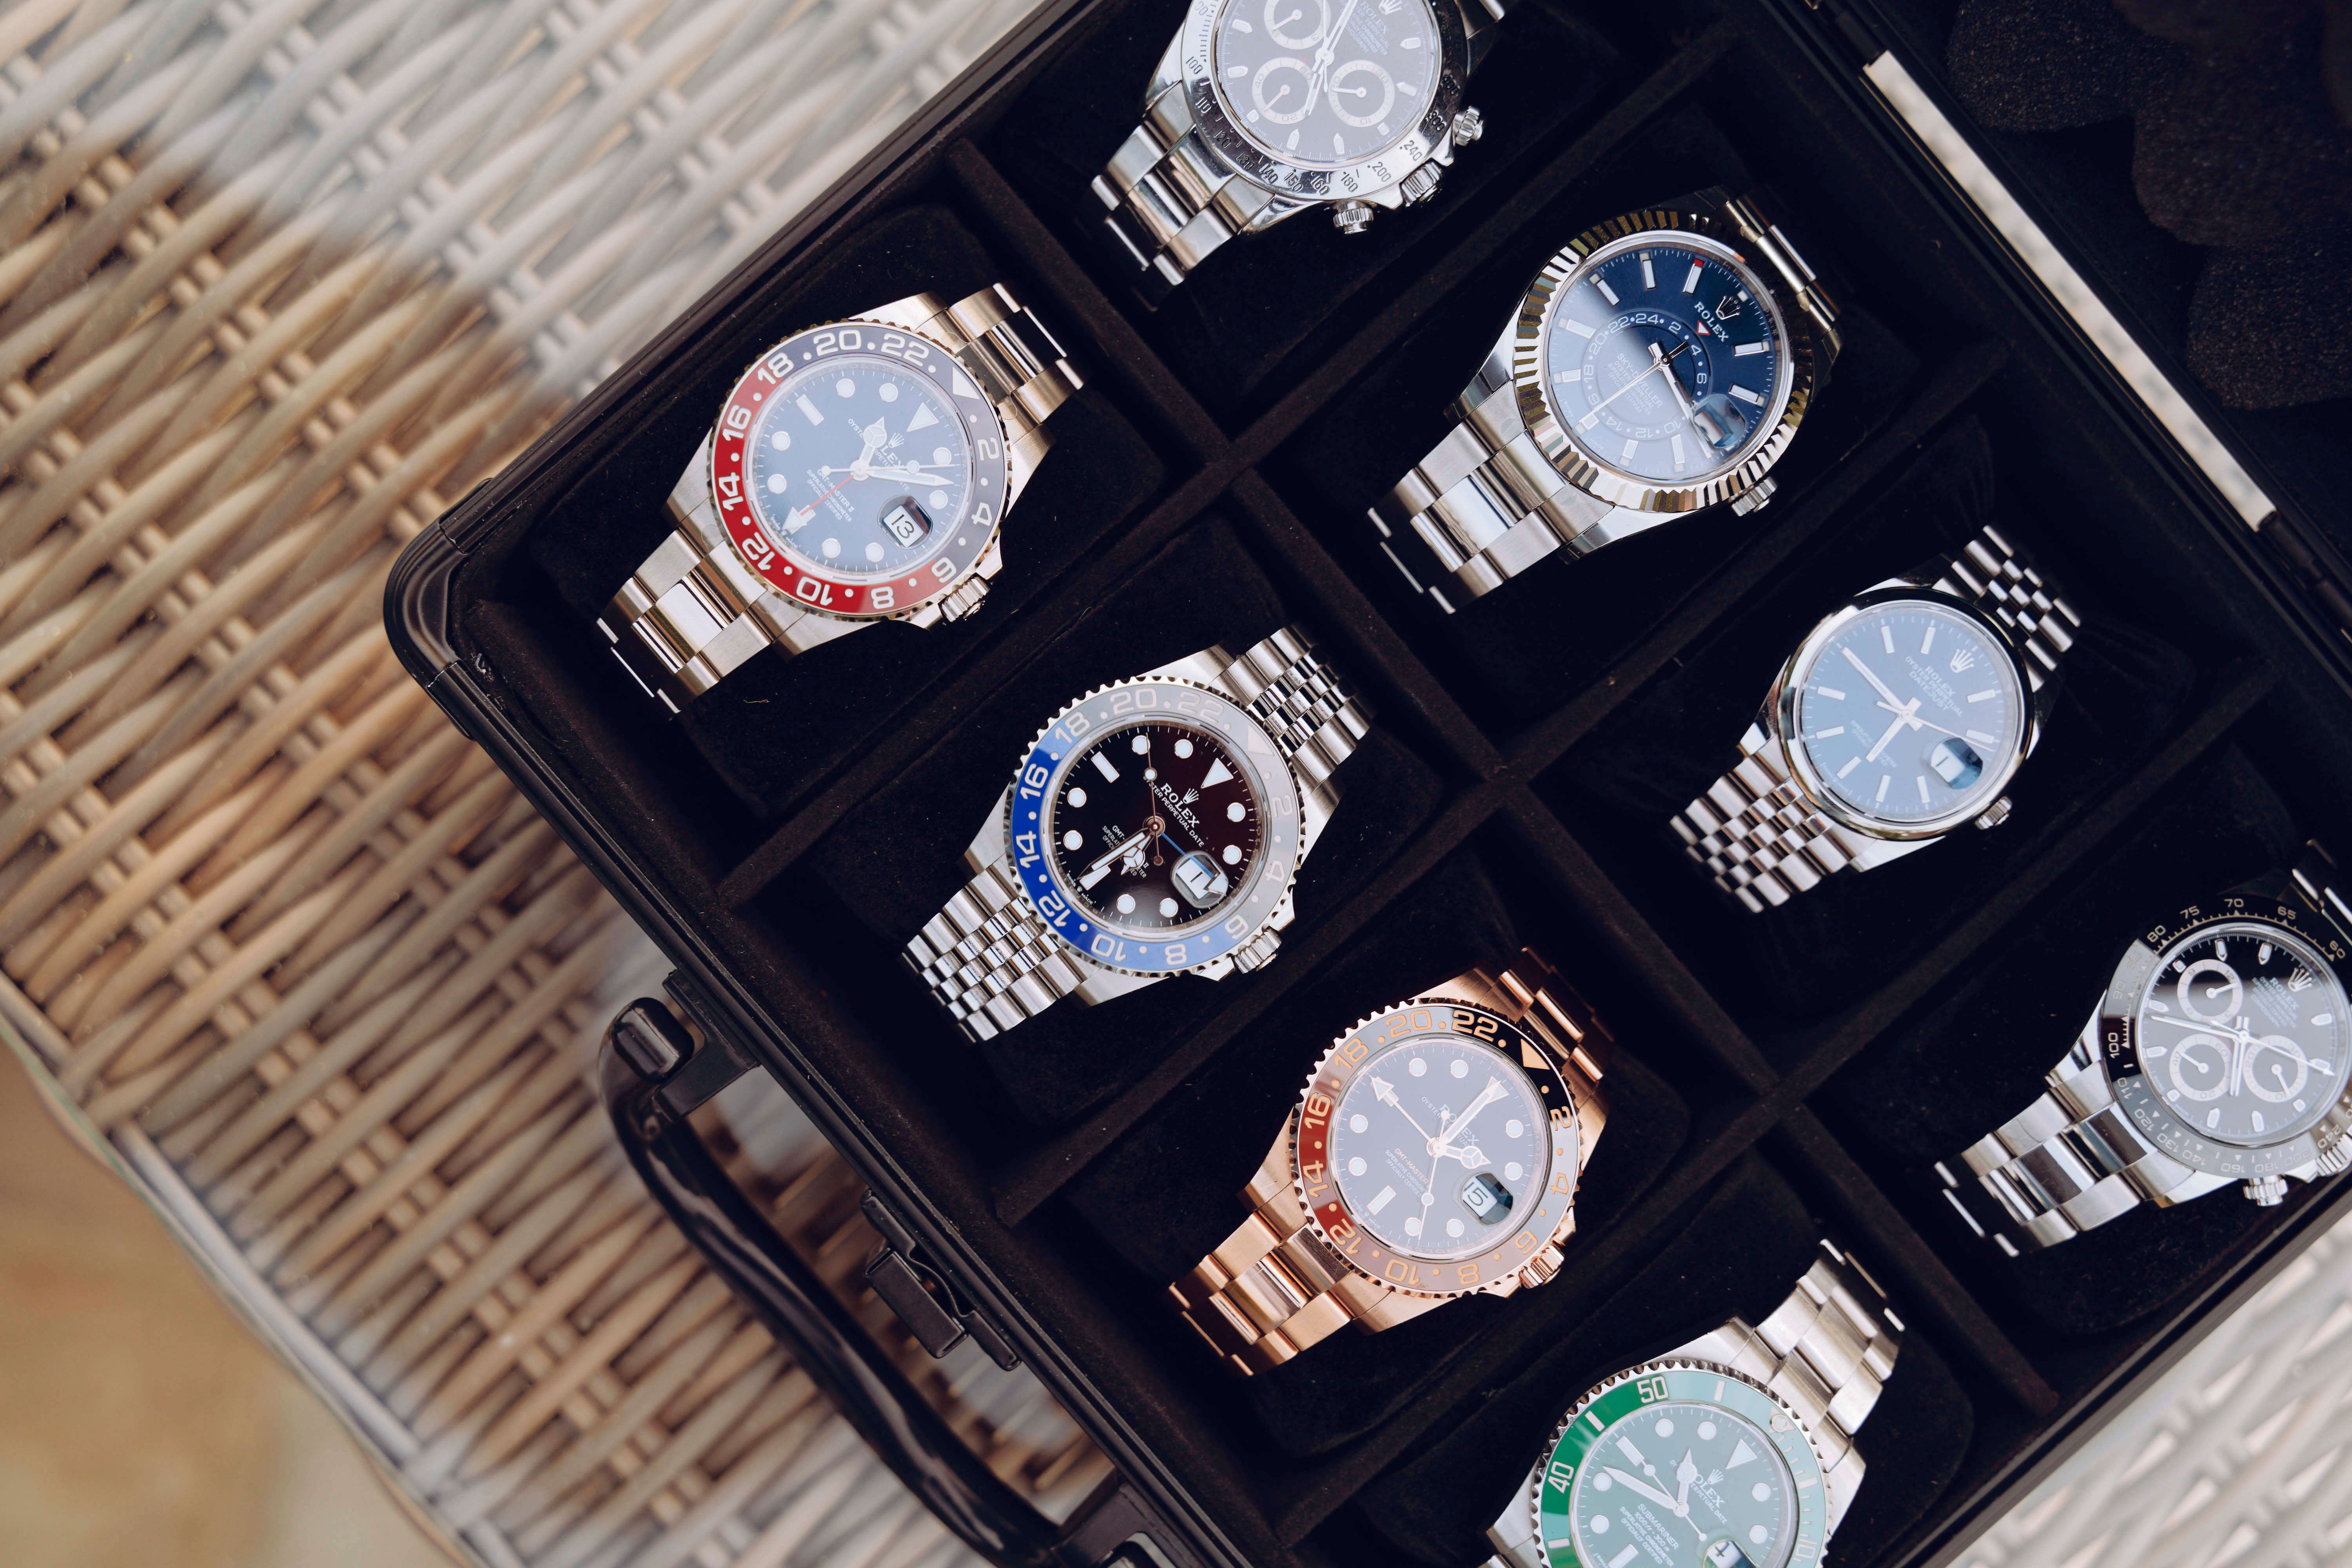 The Unlikely Watch Collectors: Rolex Edition